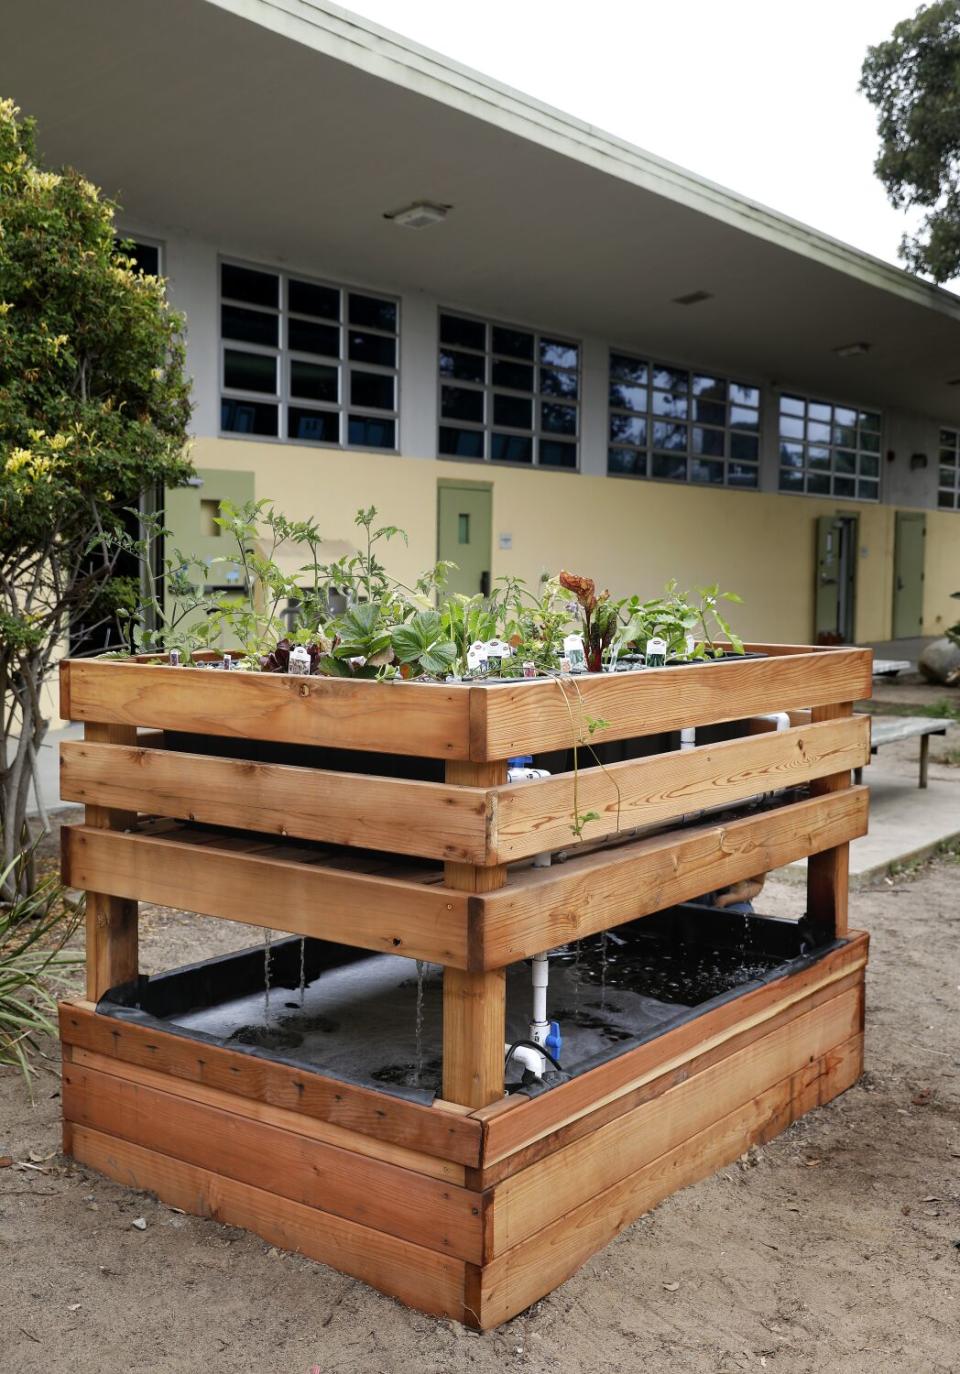 An aquaponics vegetable garden that uses recycled water from a fish pond.